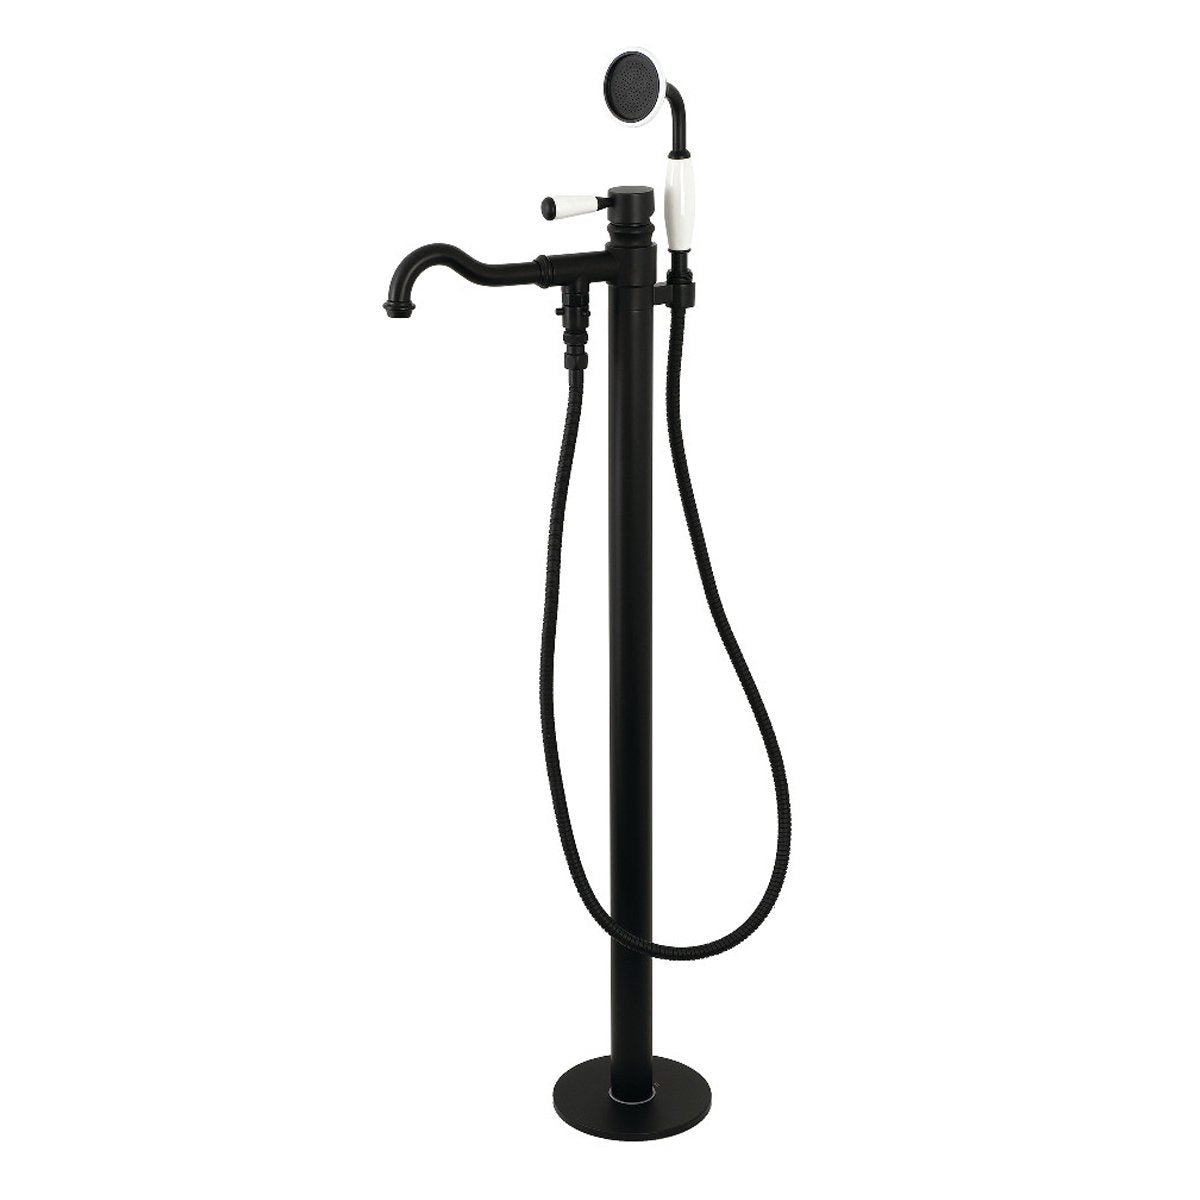 Kingston Brass Paris Freestanding Tub Faucet with Hand Shower